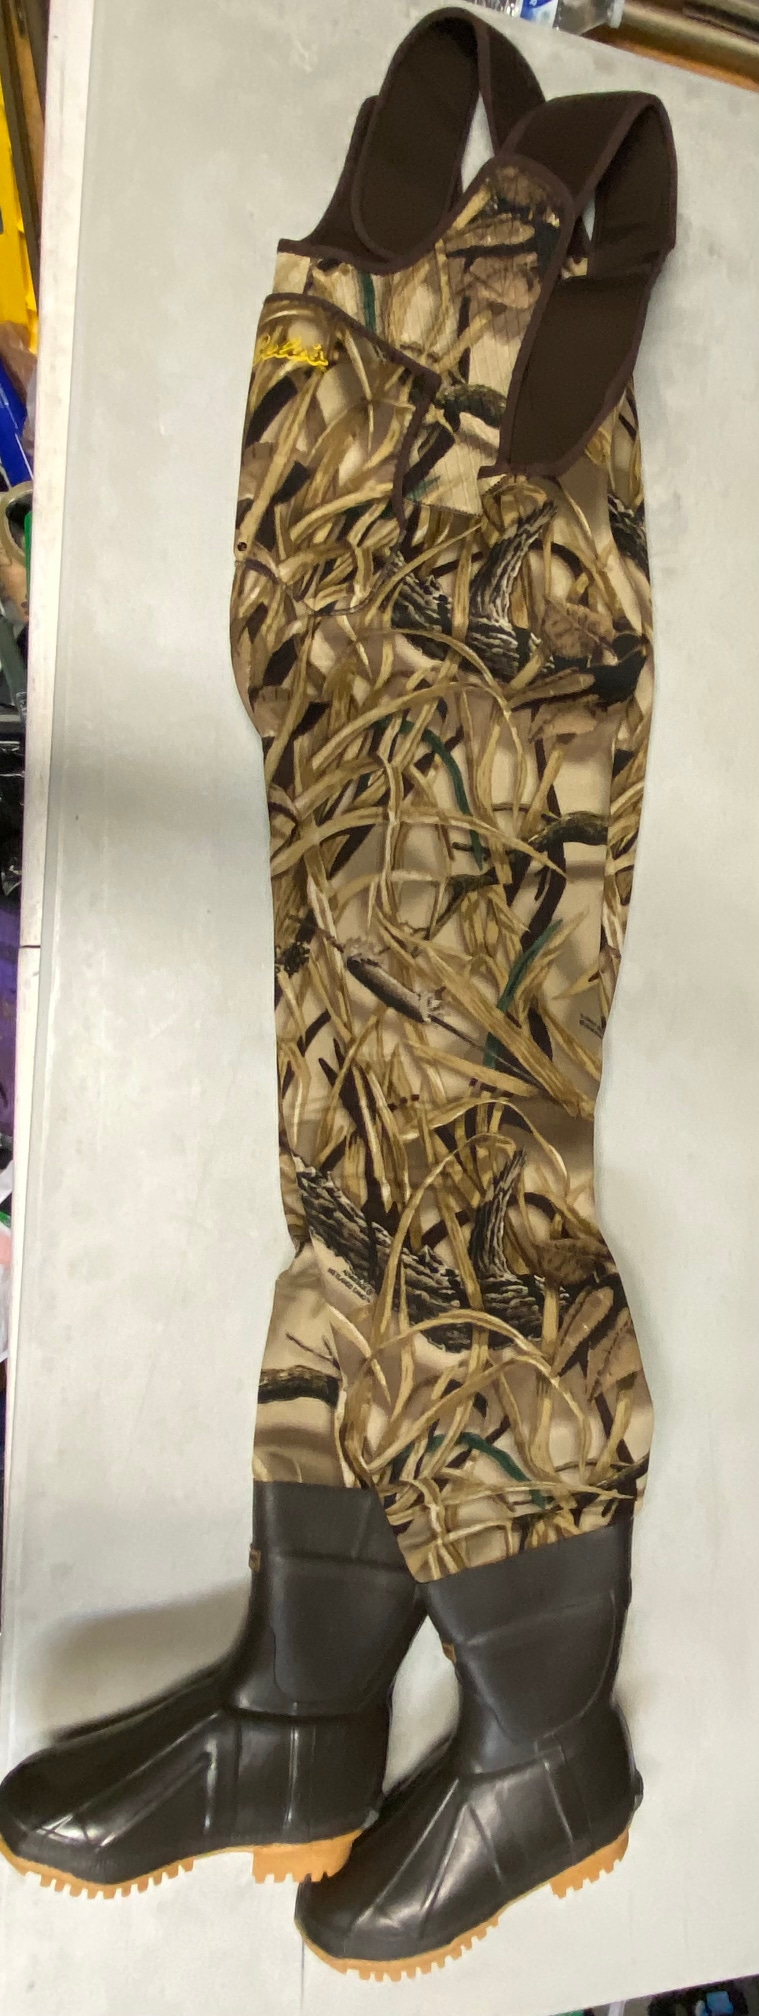 Cabelas Waders And Felt Bottom Boots